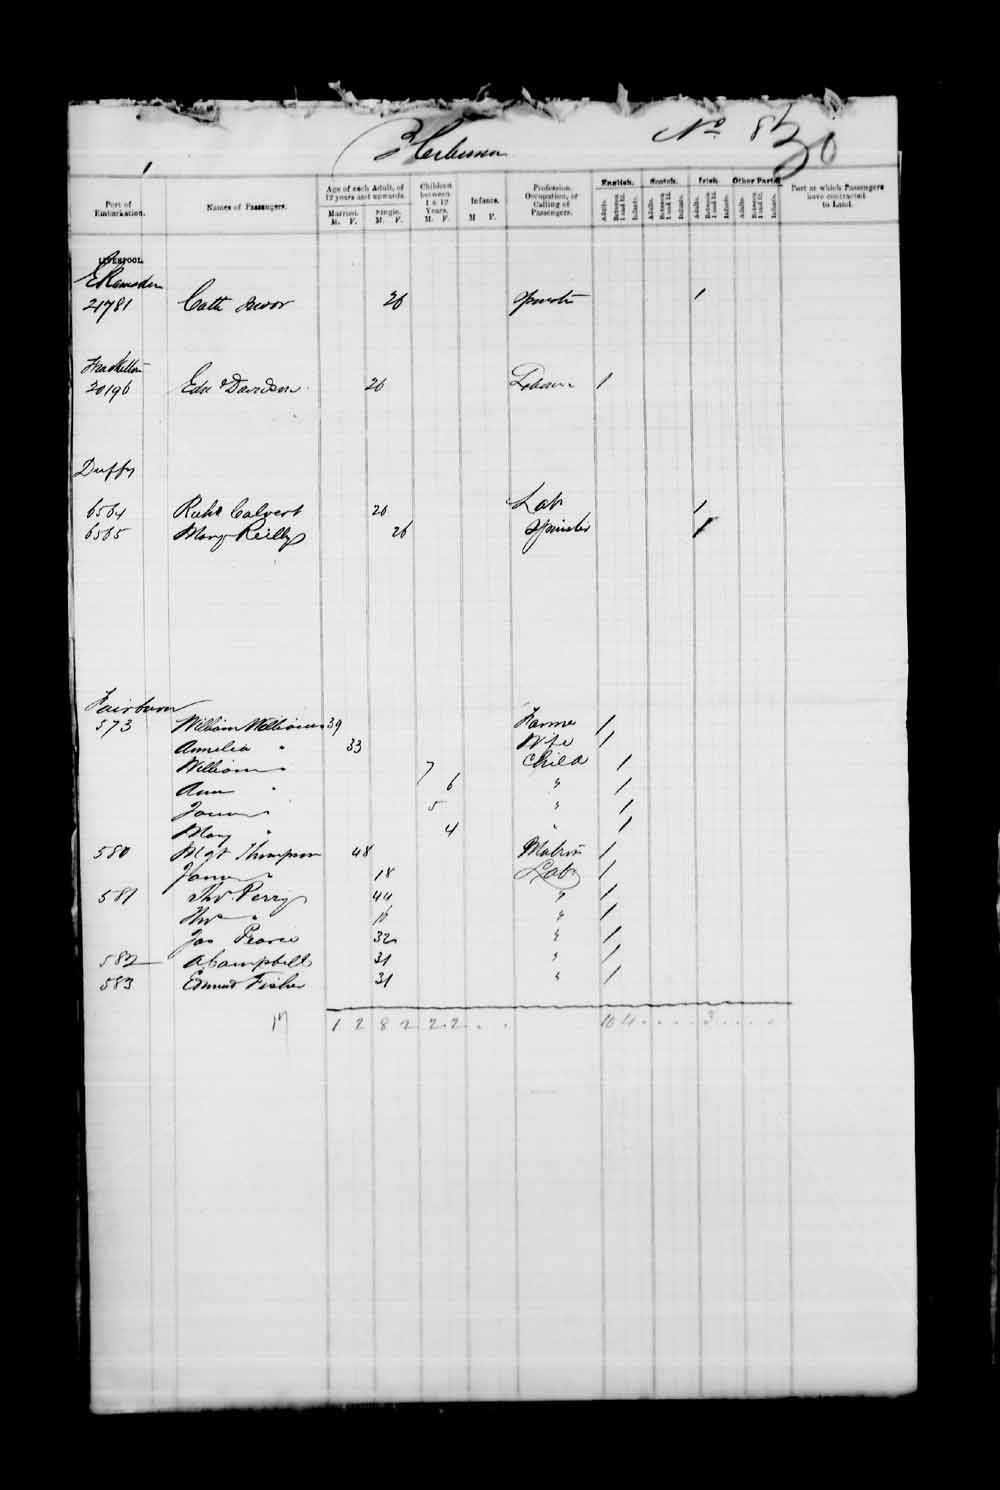 Digitized page of Passenger Lists for Image No.: e003530476